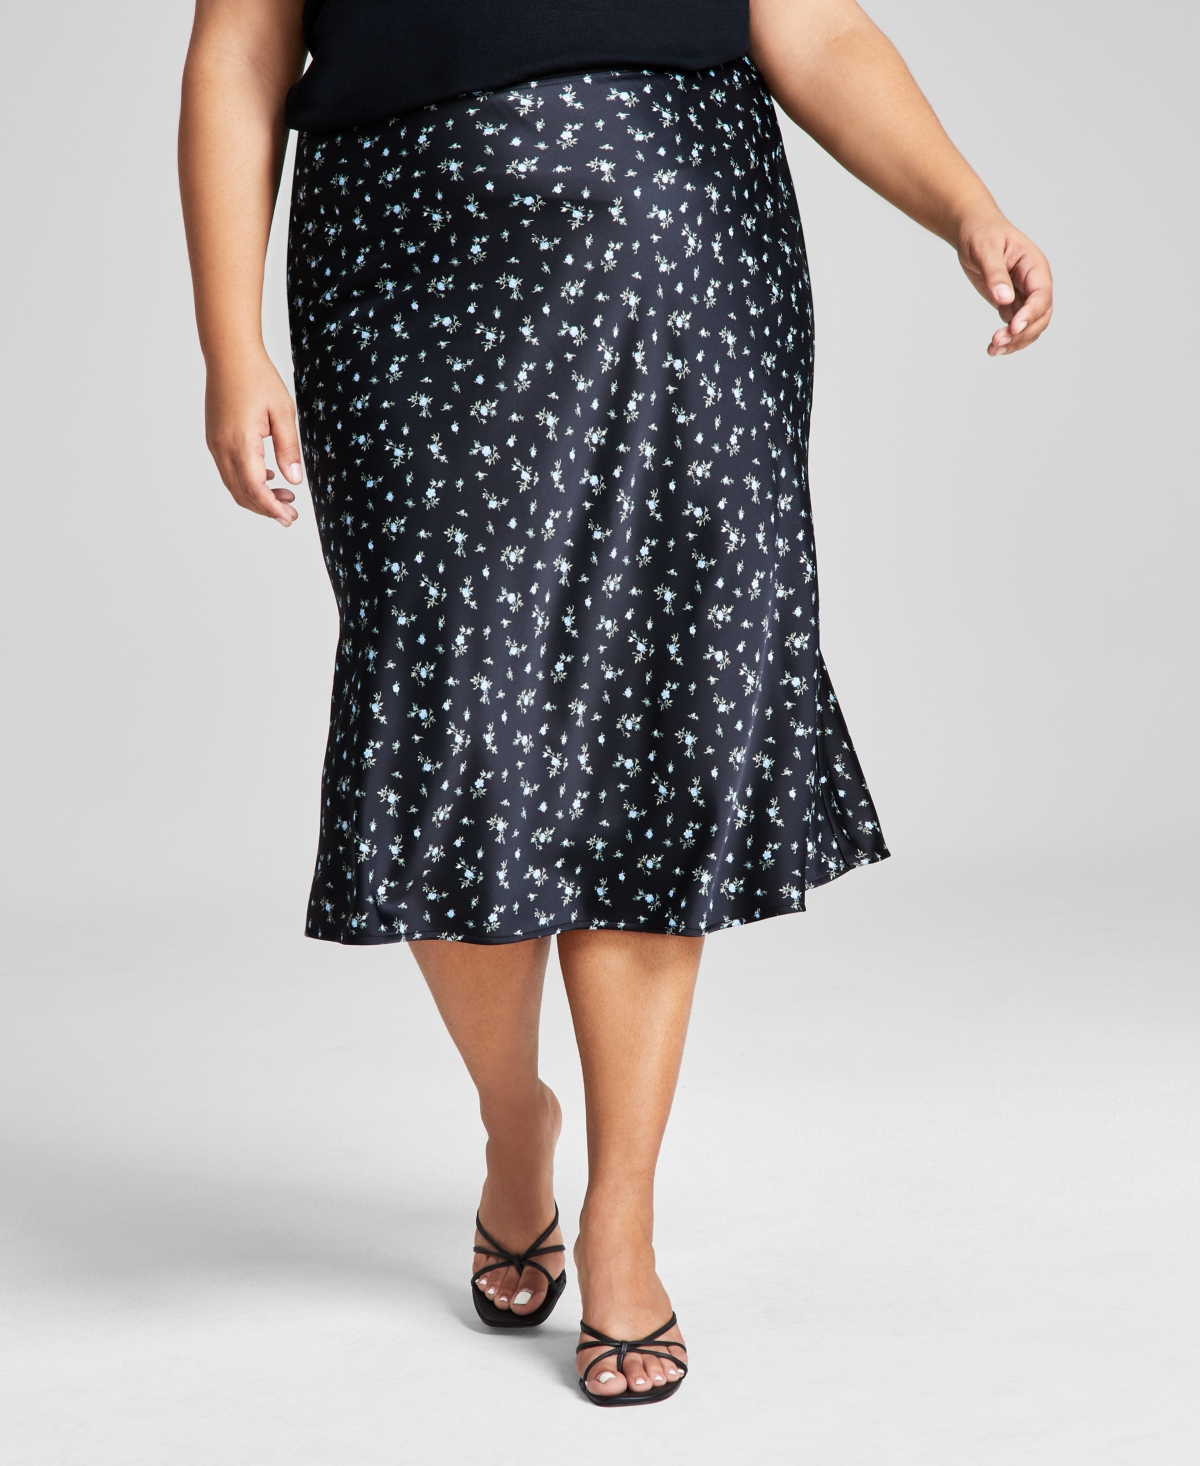 AND NOW THIS TRENDY PLUS SIZE FLORAL-PRINT MIDI SKIRT